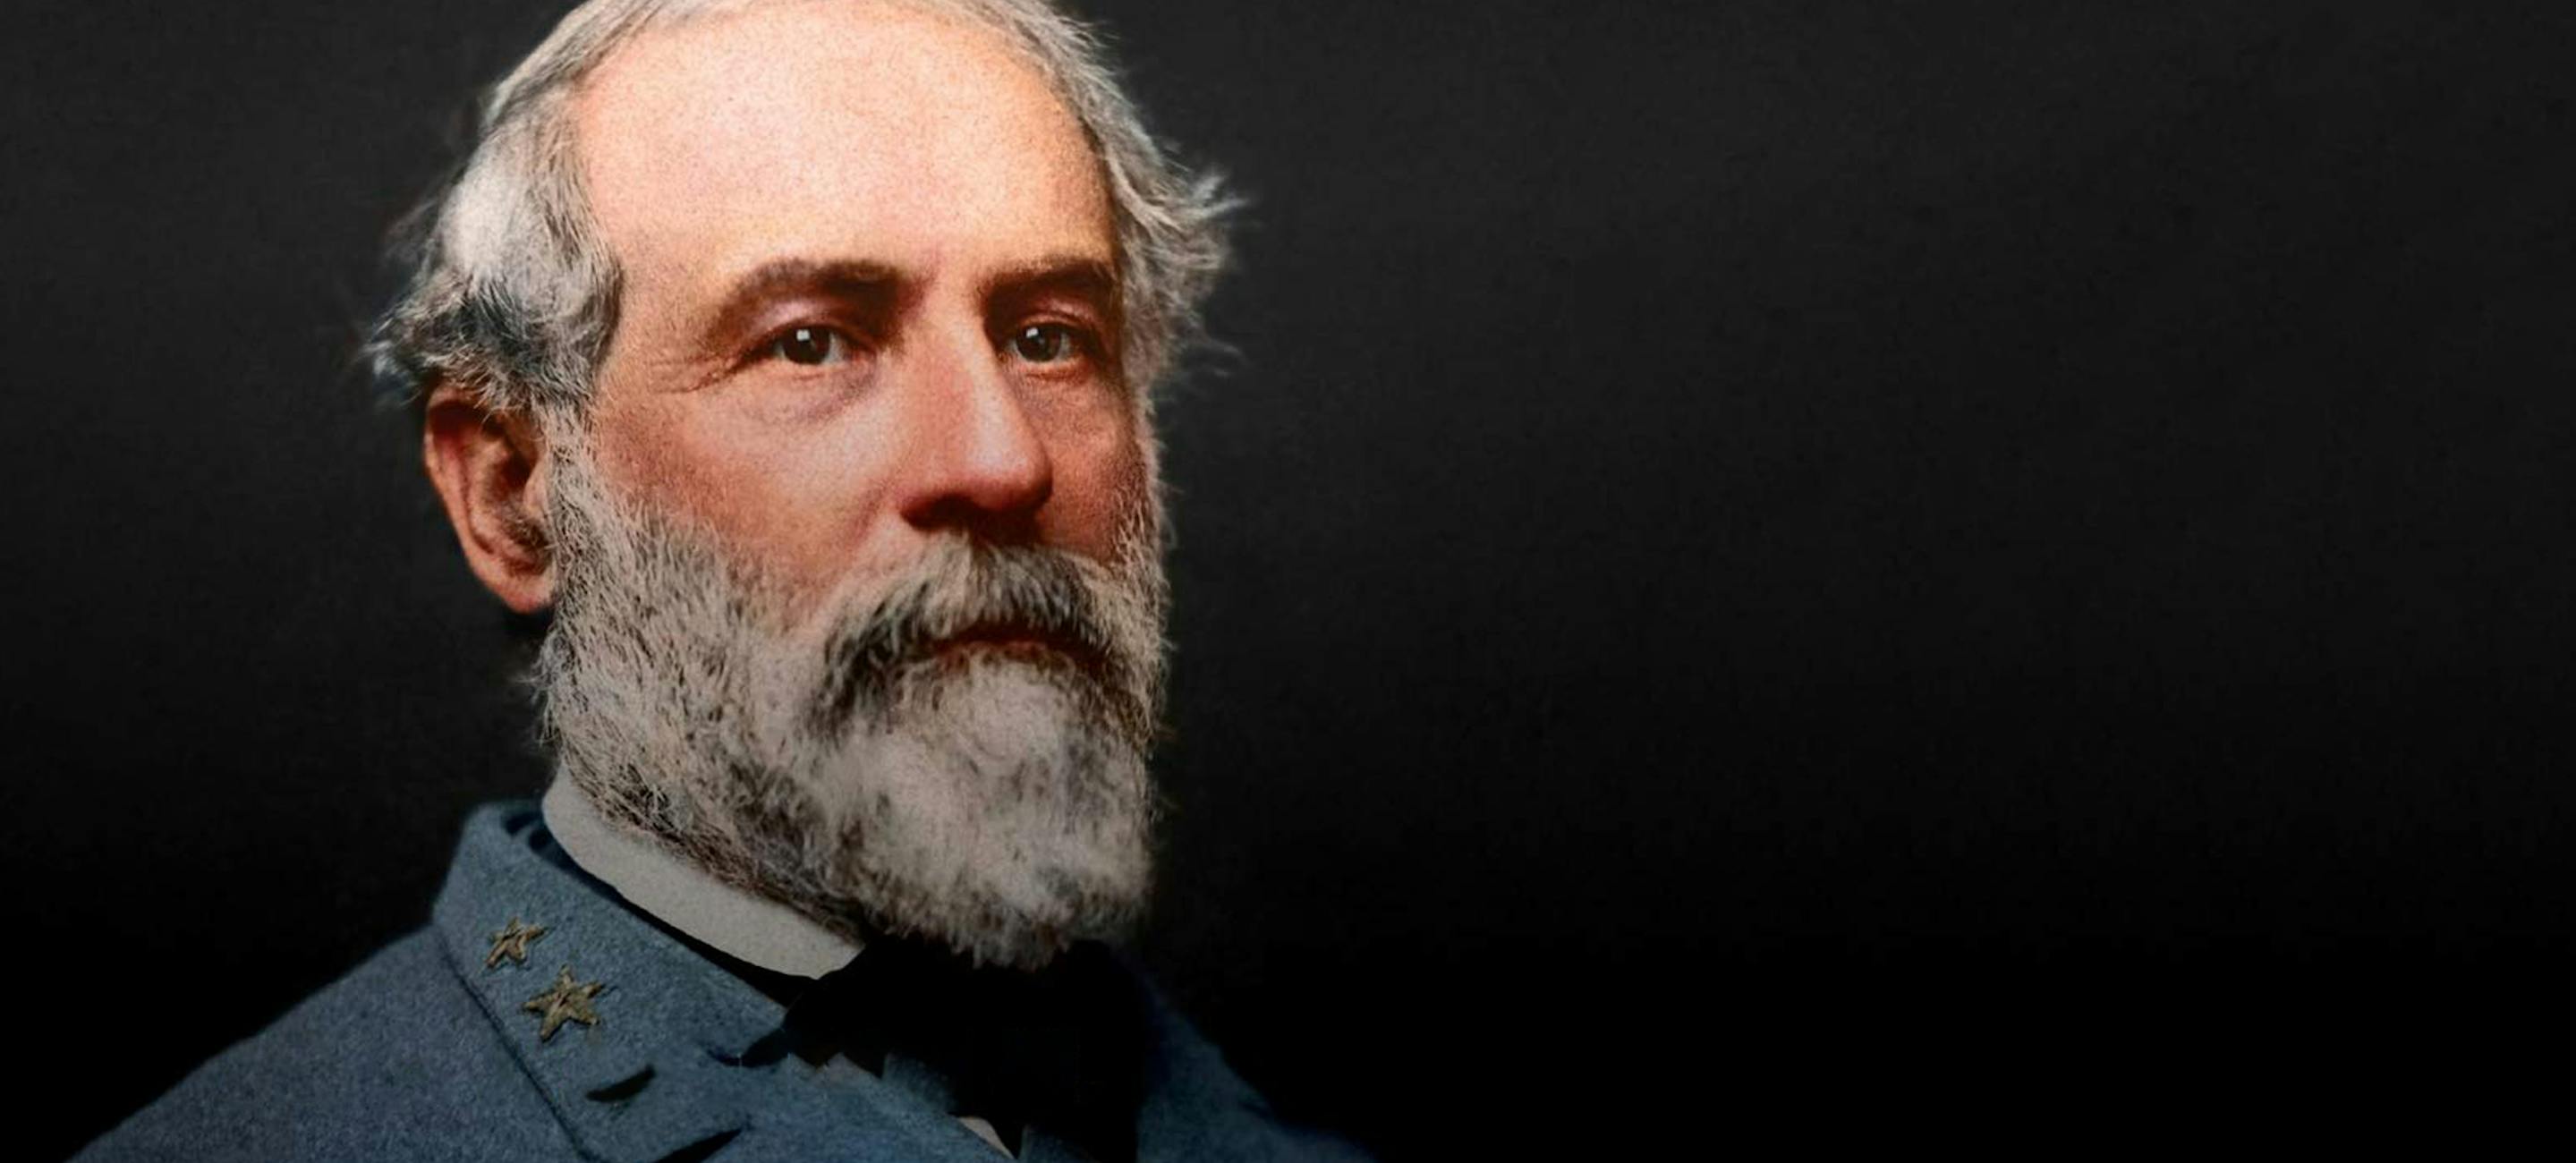 an image of Robert E. Lee from the detail of a book cover